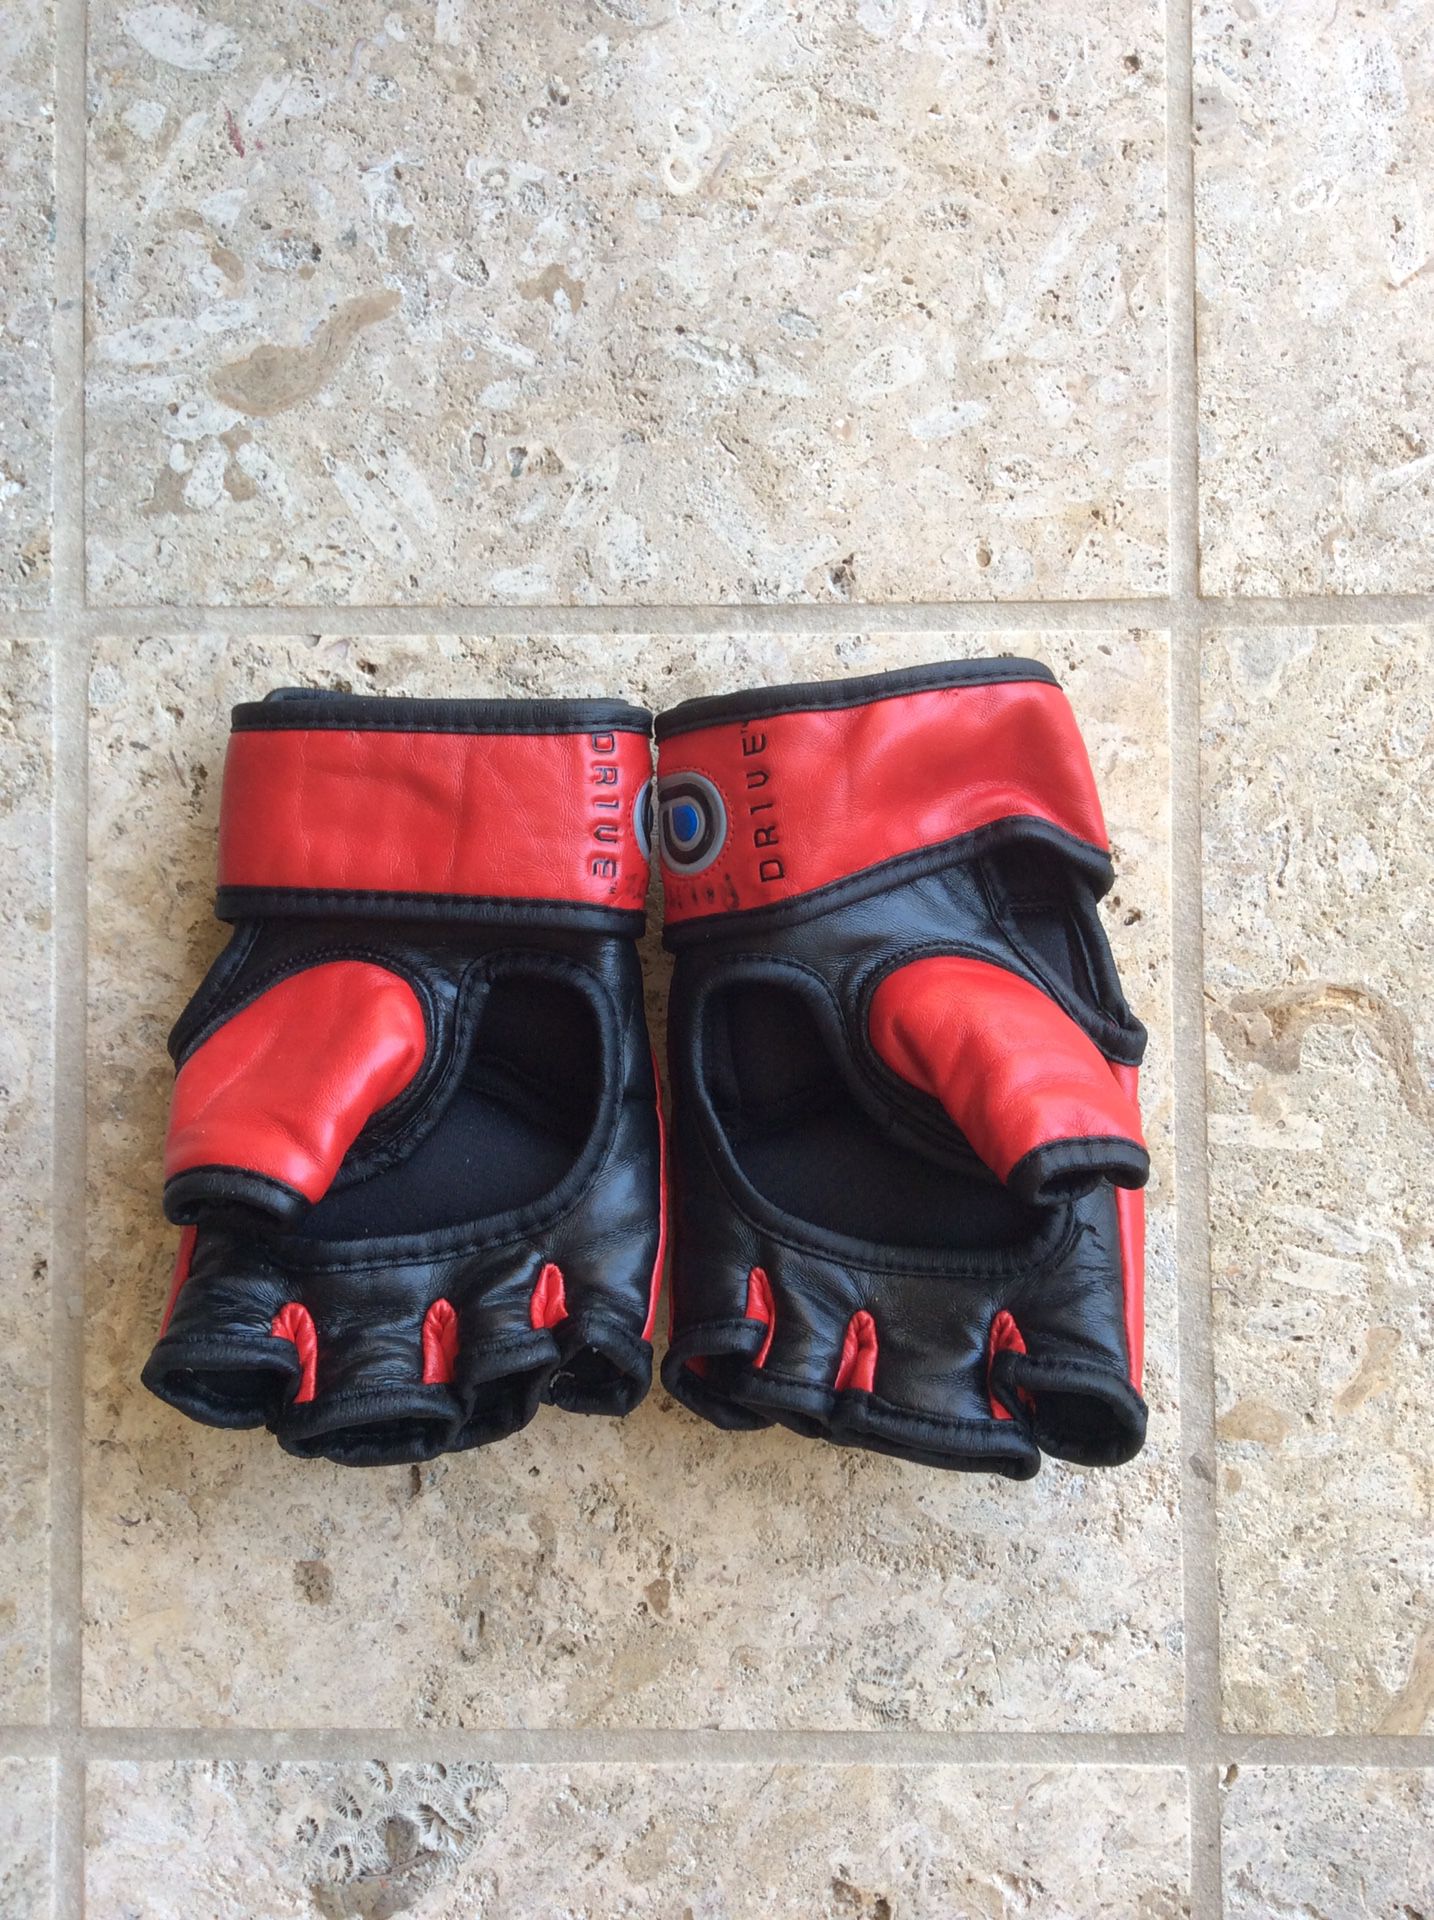 Boxing/martial arts training gloves (Century Drive)